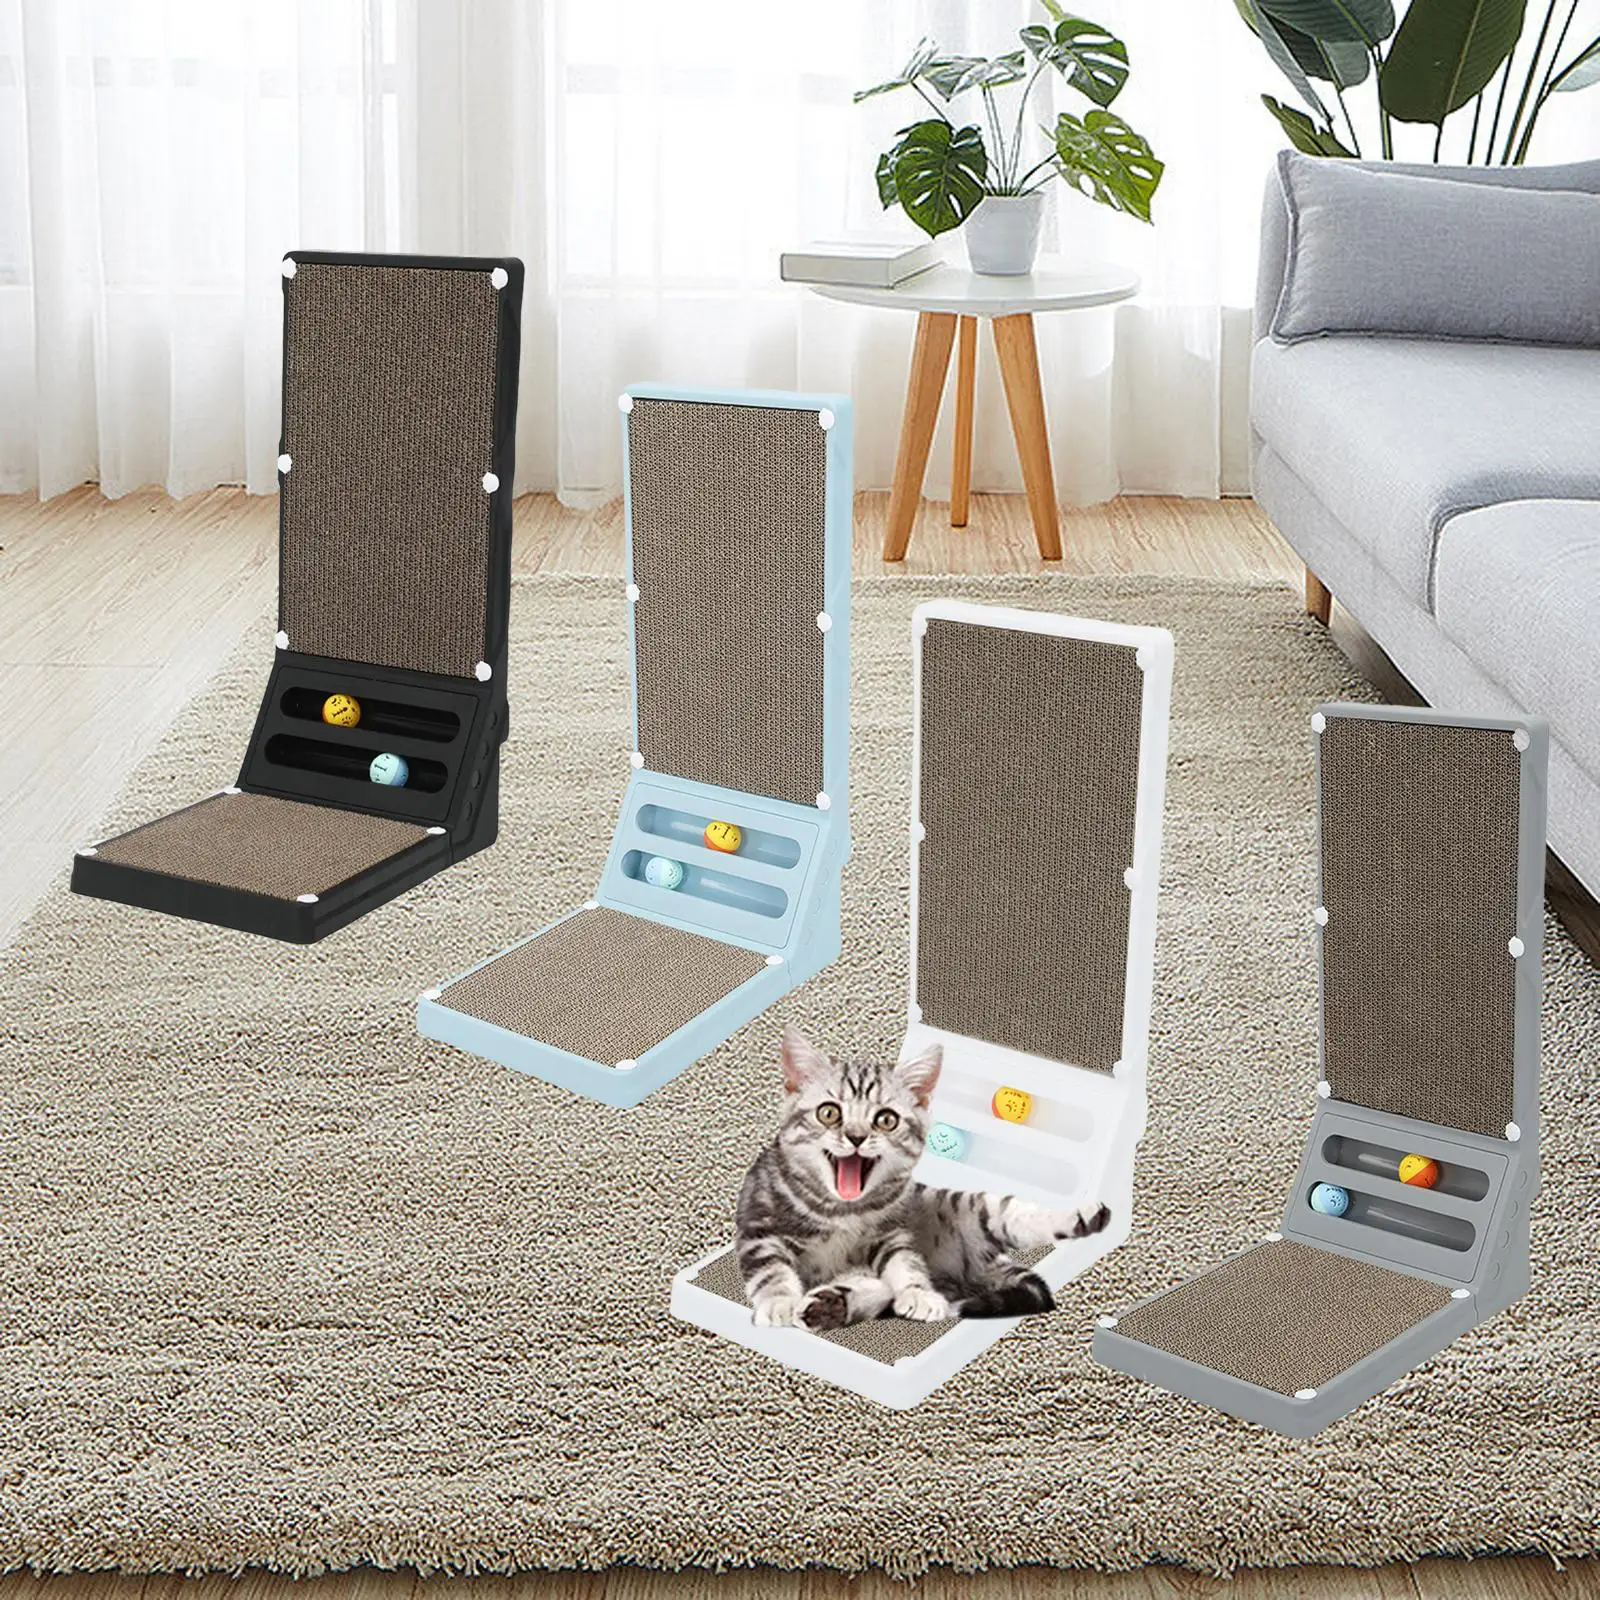 Cat Scratching Post Lounge Pet Cushion Cat Scratching Toy Scratch Pad Cat Scratcher Corrugated Cardboard for Playing Kitten Rest